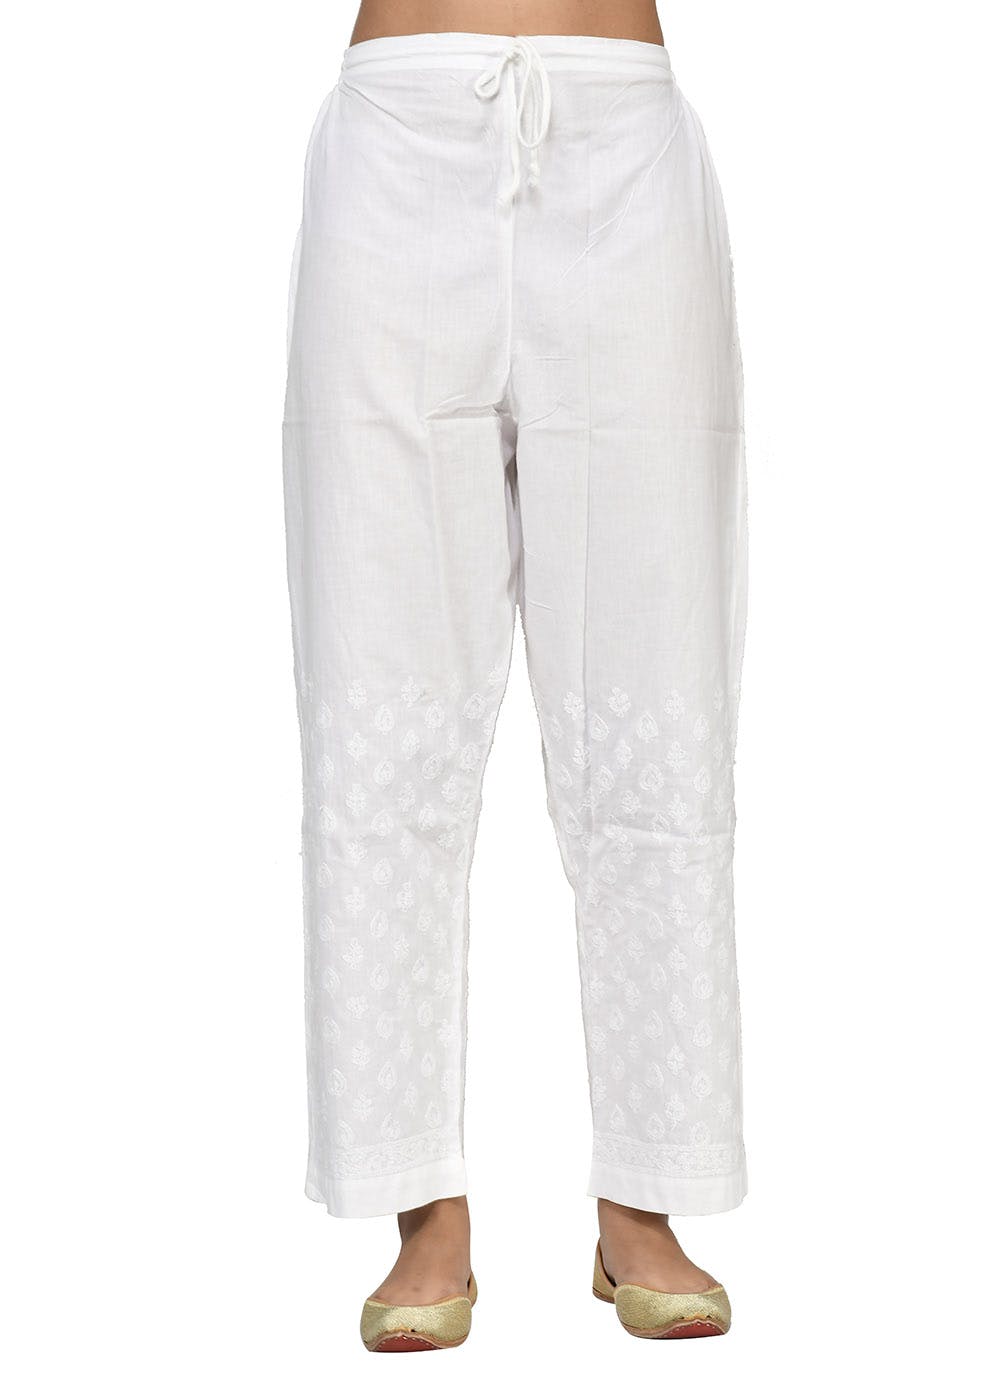 designer Baby pink and white Cotton palazzo pants woman combo